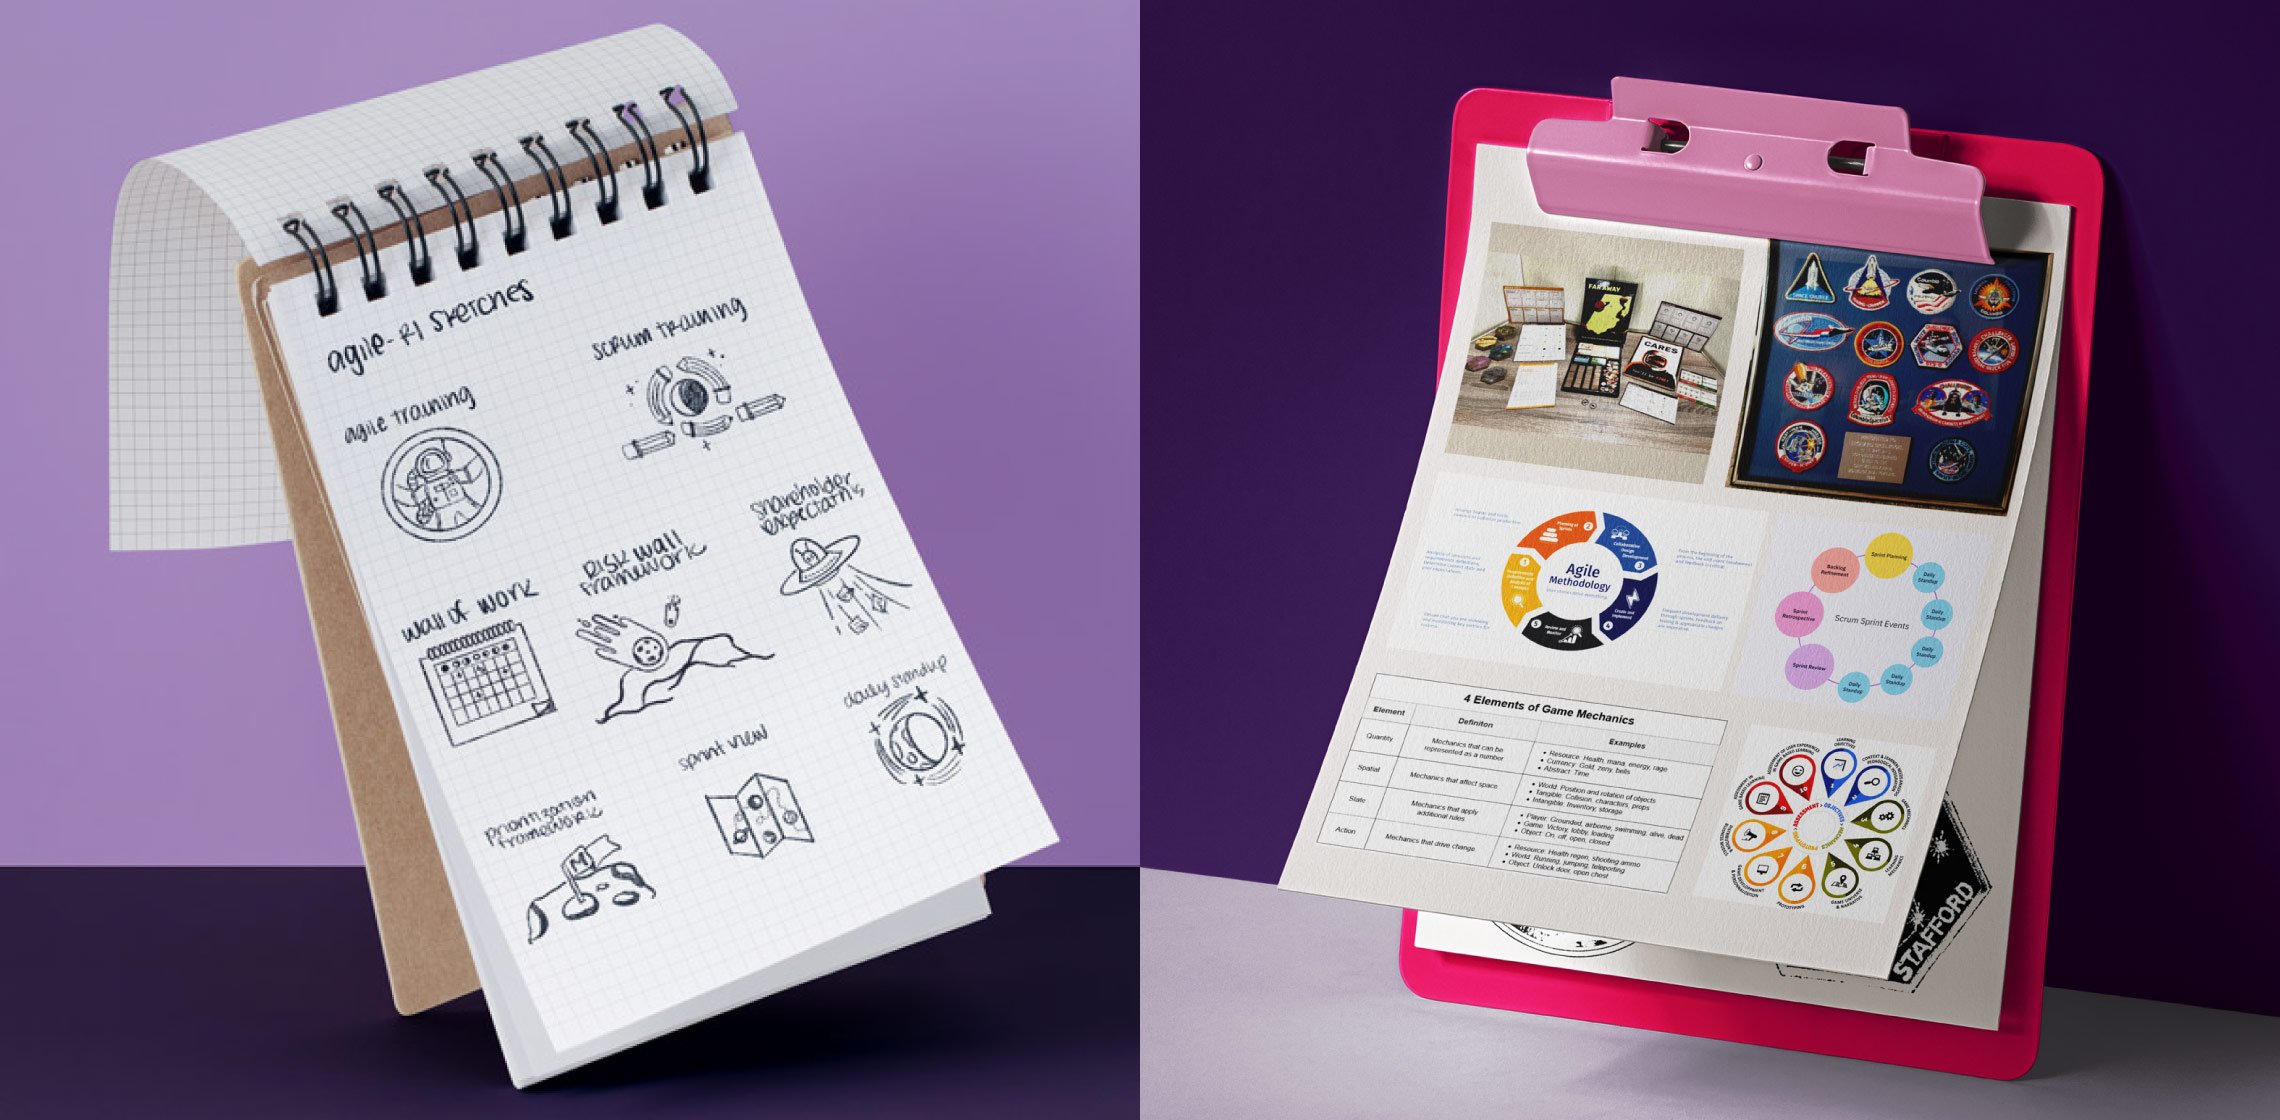 Side by side images on purple backgrounds: at left, an open sketchbook showing sketches of space + agile process-themed badges; at right, images describing game theory, agile methods, and vintage mission badges